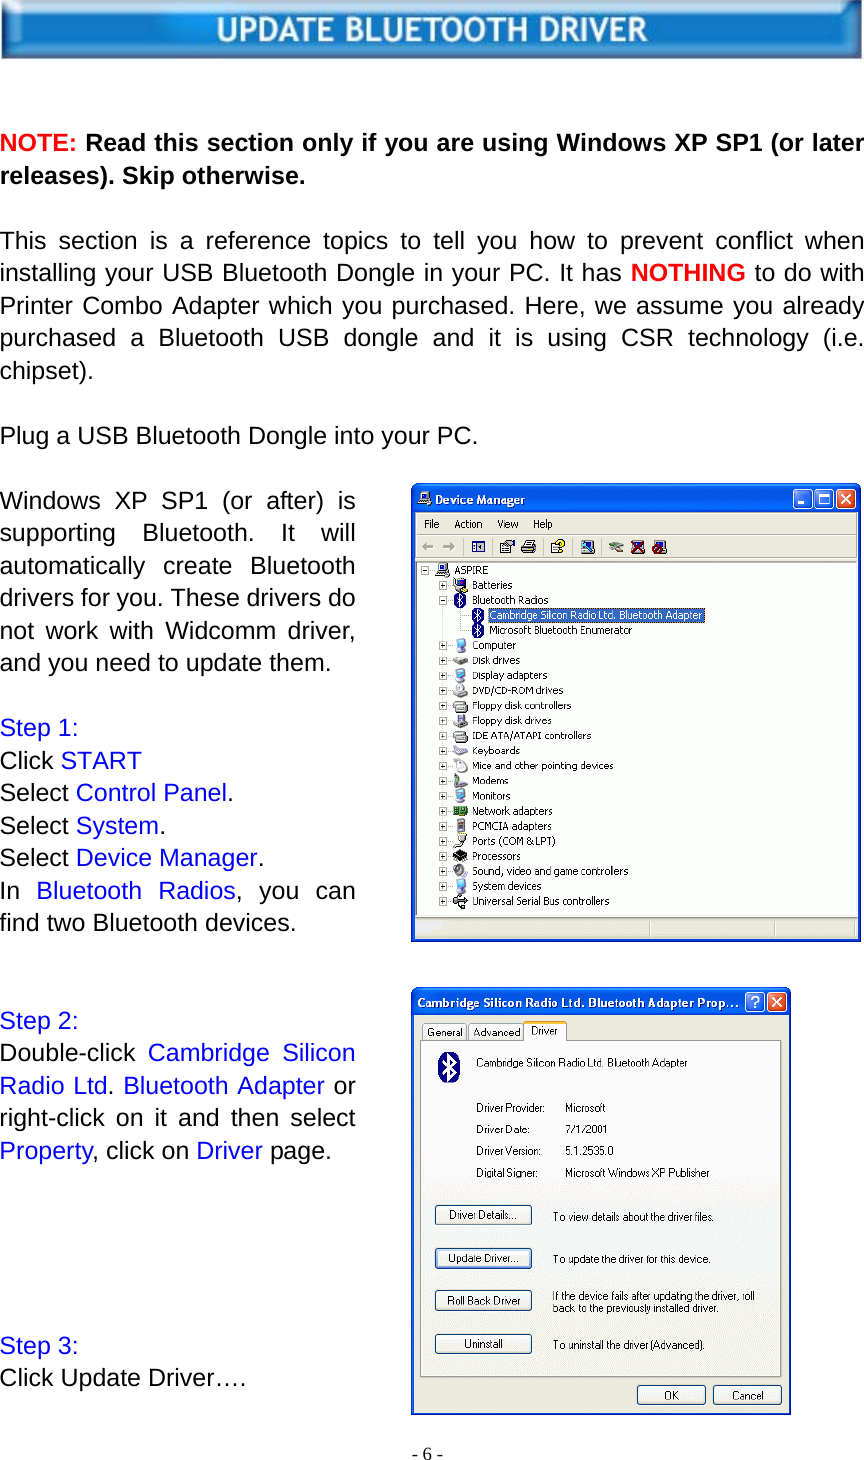  - 6 -     NOTE: Read this section only if you are using Windows XP SP1 (or later releases). Skip otherwise.  This section is a reference topics to tell you how to prevent conflict when installing your USB Bluetooth Dongle in your PC. It has NOTHING to do with Printer Combo Adapter which you purchased. Here, we assume you already purchased a Bluetooth USB dongle and it is using CSR technology (i.e. chipset).  Plug a USB Bluetooth Dongle into your PC.  Windows XP SP1 (or after) is supporting Bluetooth. It will automatically  create Bluetooth drivers for you. These drivers do not work with Widcomm driver, and you need to update them.  Step 1: Click START Select Control Panel. Select System. Select Device Manager. In  Bluetooth Radios, you can find two Bluetooth devices.   Step 2: Double-click  Cambridge Silicon Radio Ltd. Bluetooth Adapter or right-click on it and then select Property, click on Driver page.      Step 3: Click Update Driver…. 